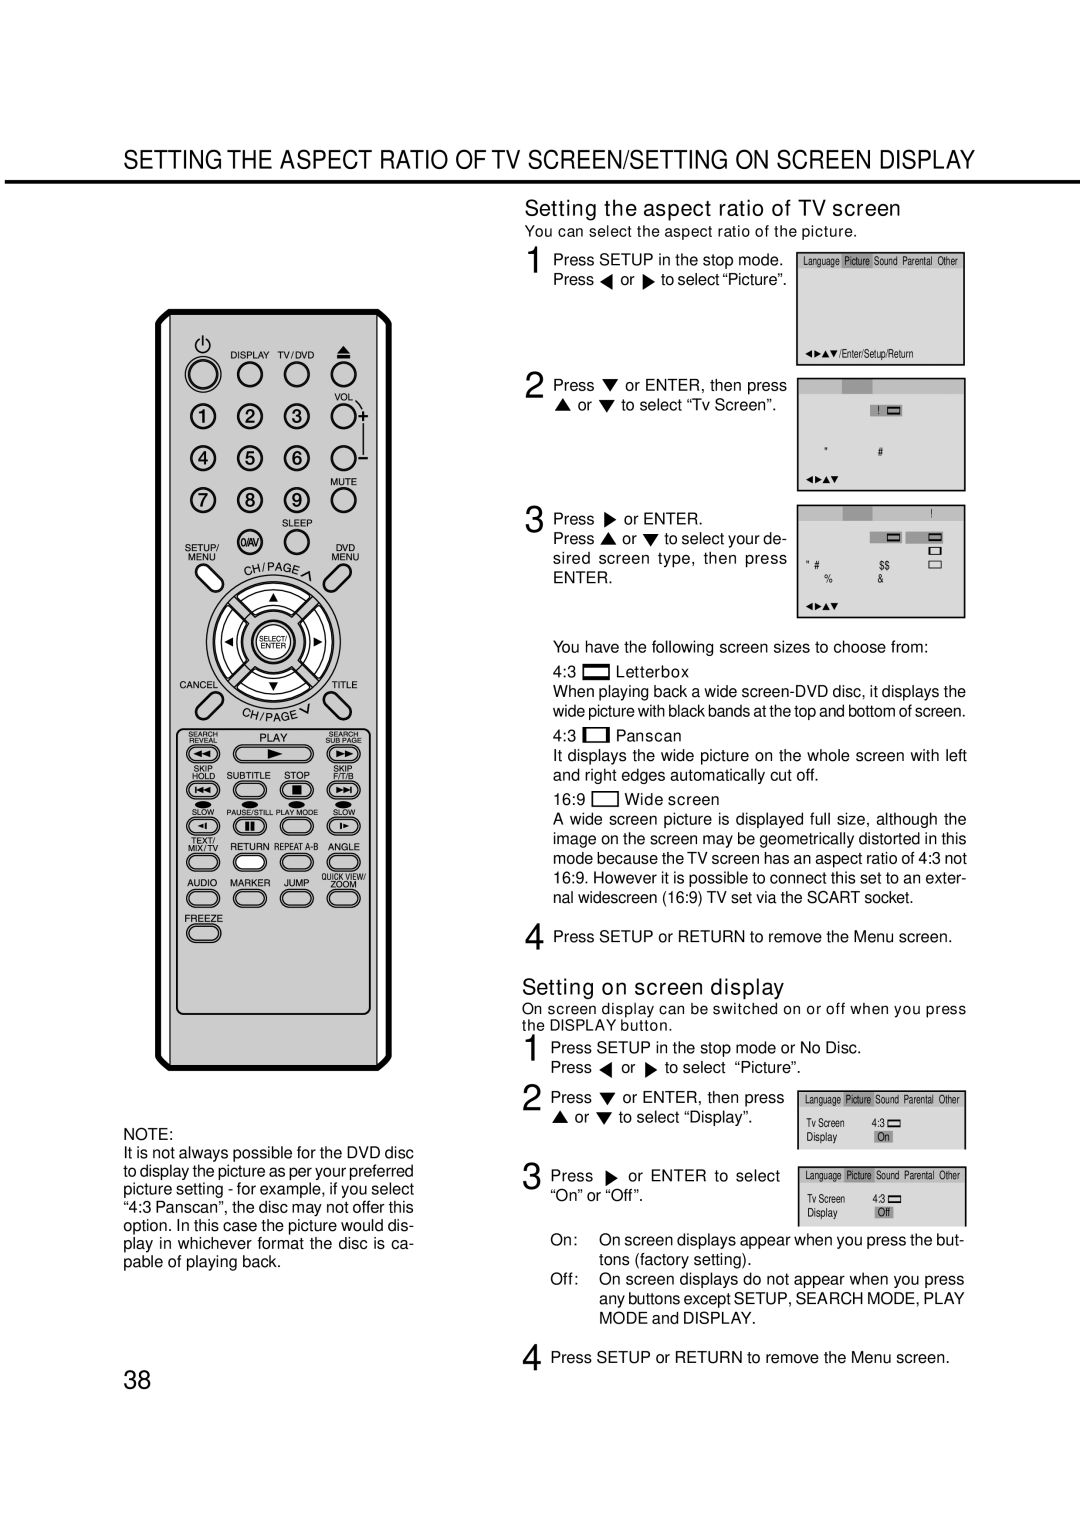 Orion 14LD manual Setting the aspect ratio of TV screen, Setting on screen display 